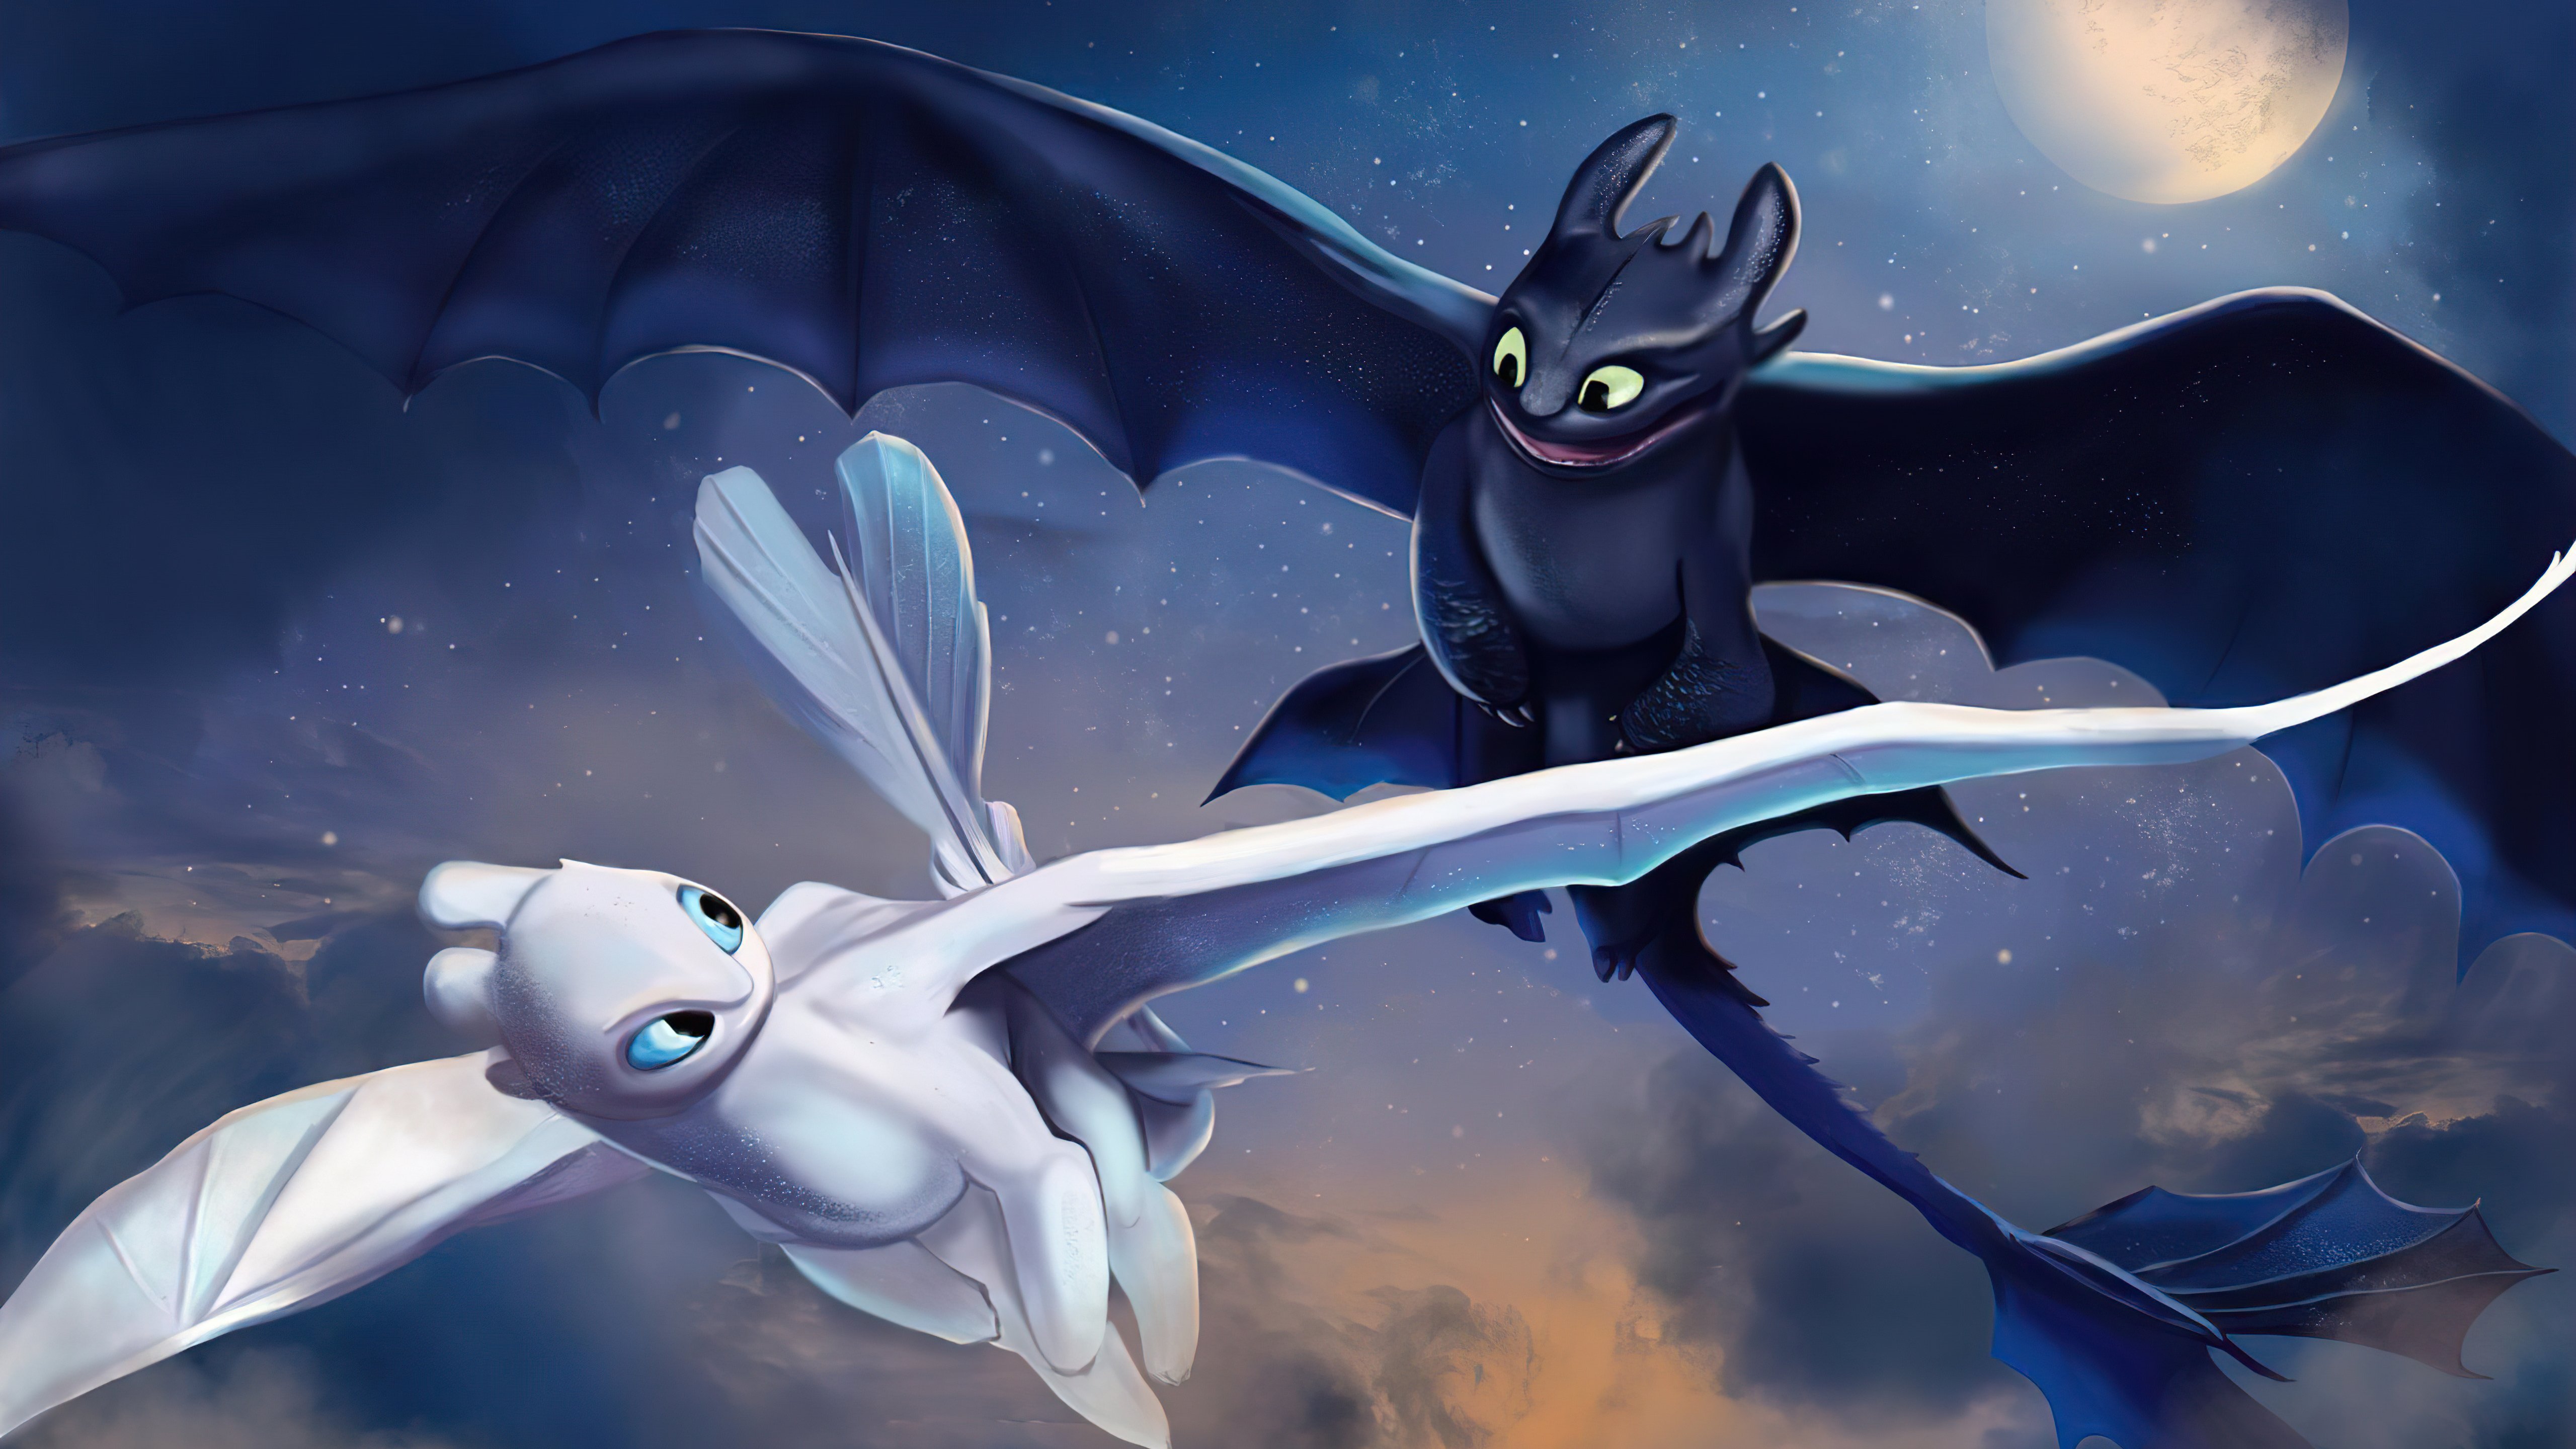 Wallpaper Toothless and Light Fury